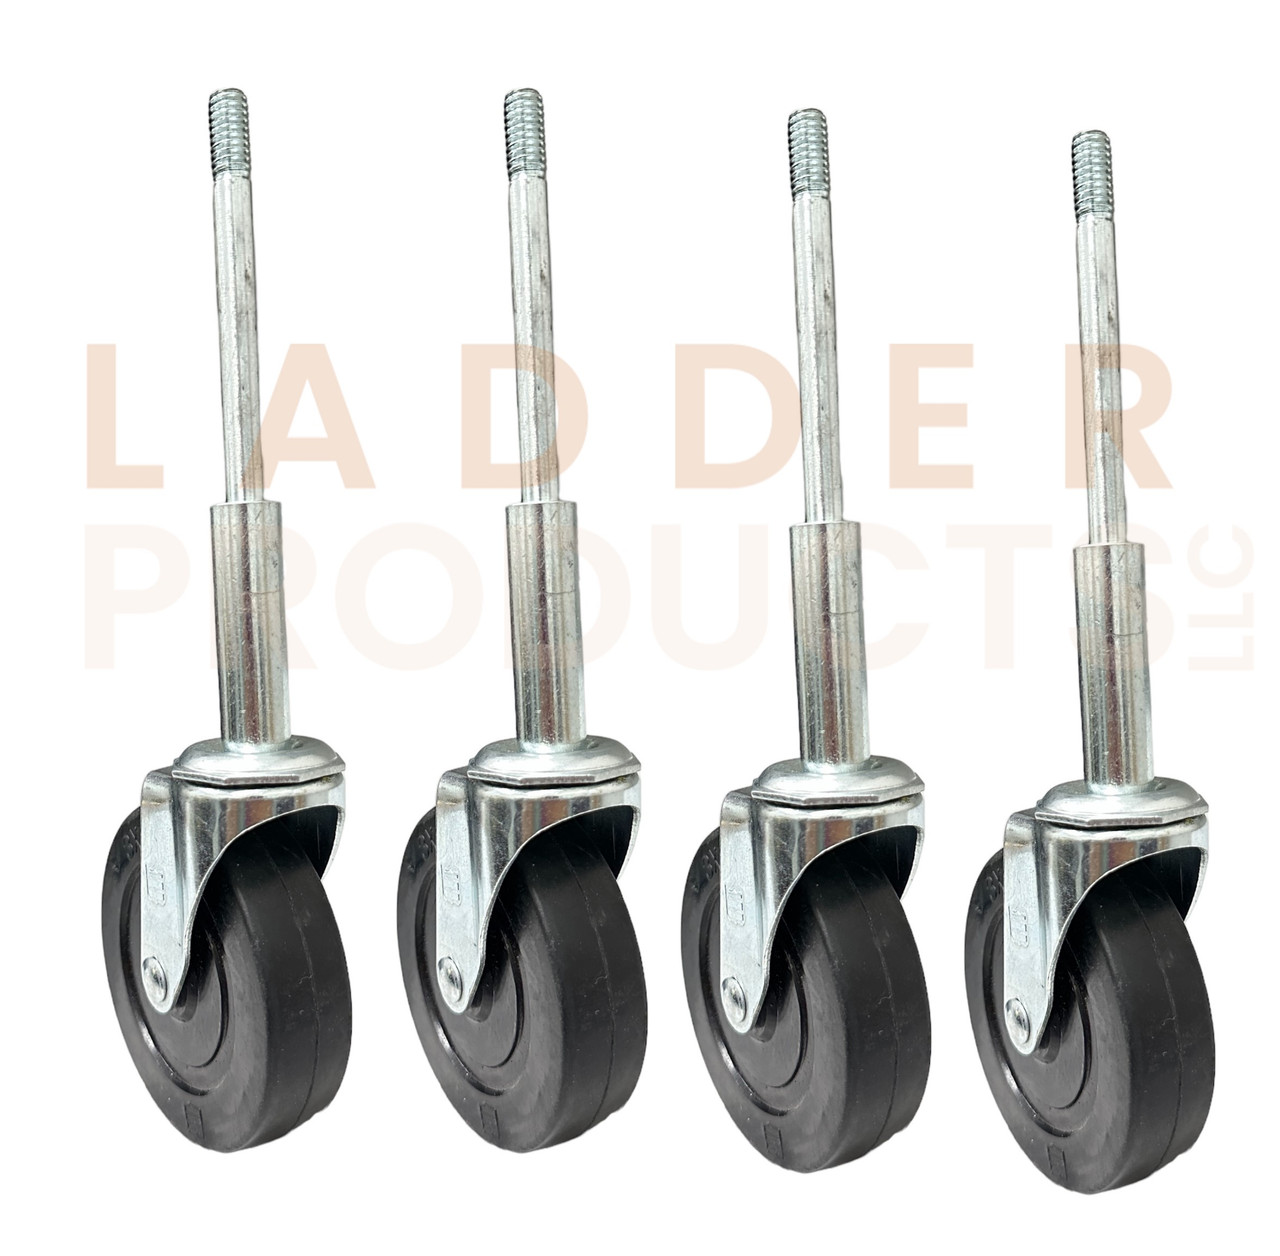 LadderProducts.com | 3" x 1" Soft Rubber Caster Wheel with 5/16" Threaded Stem Q833021SR